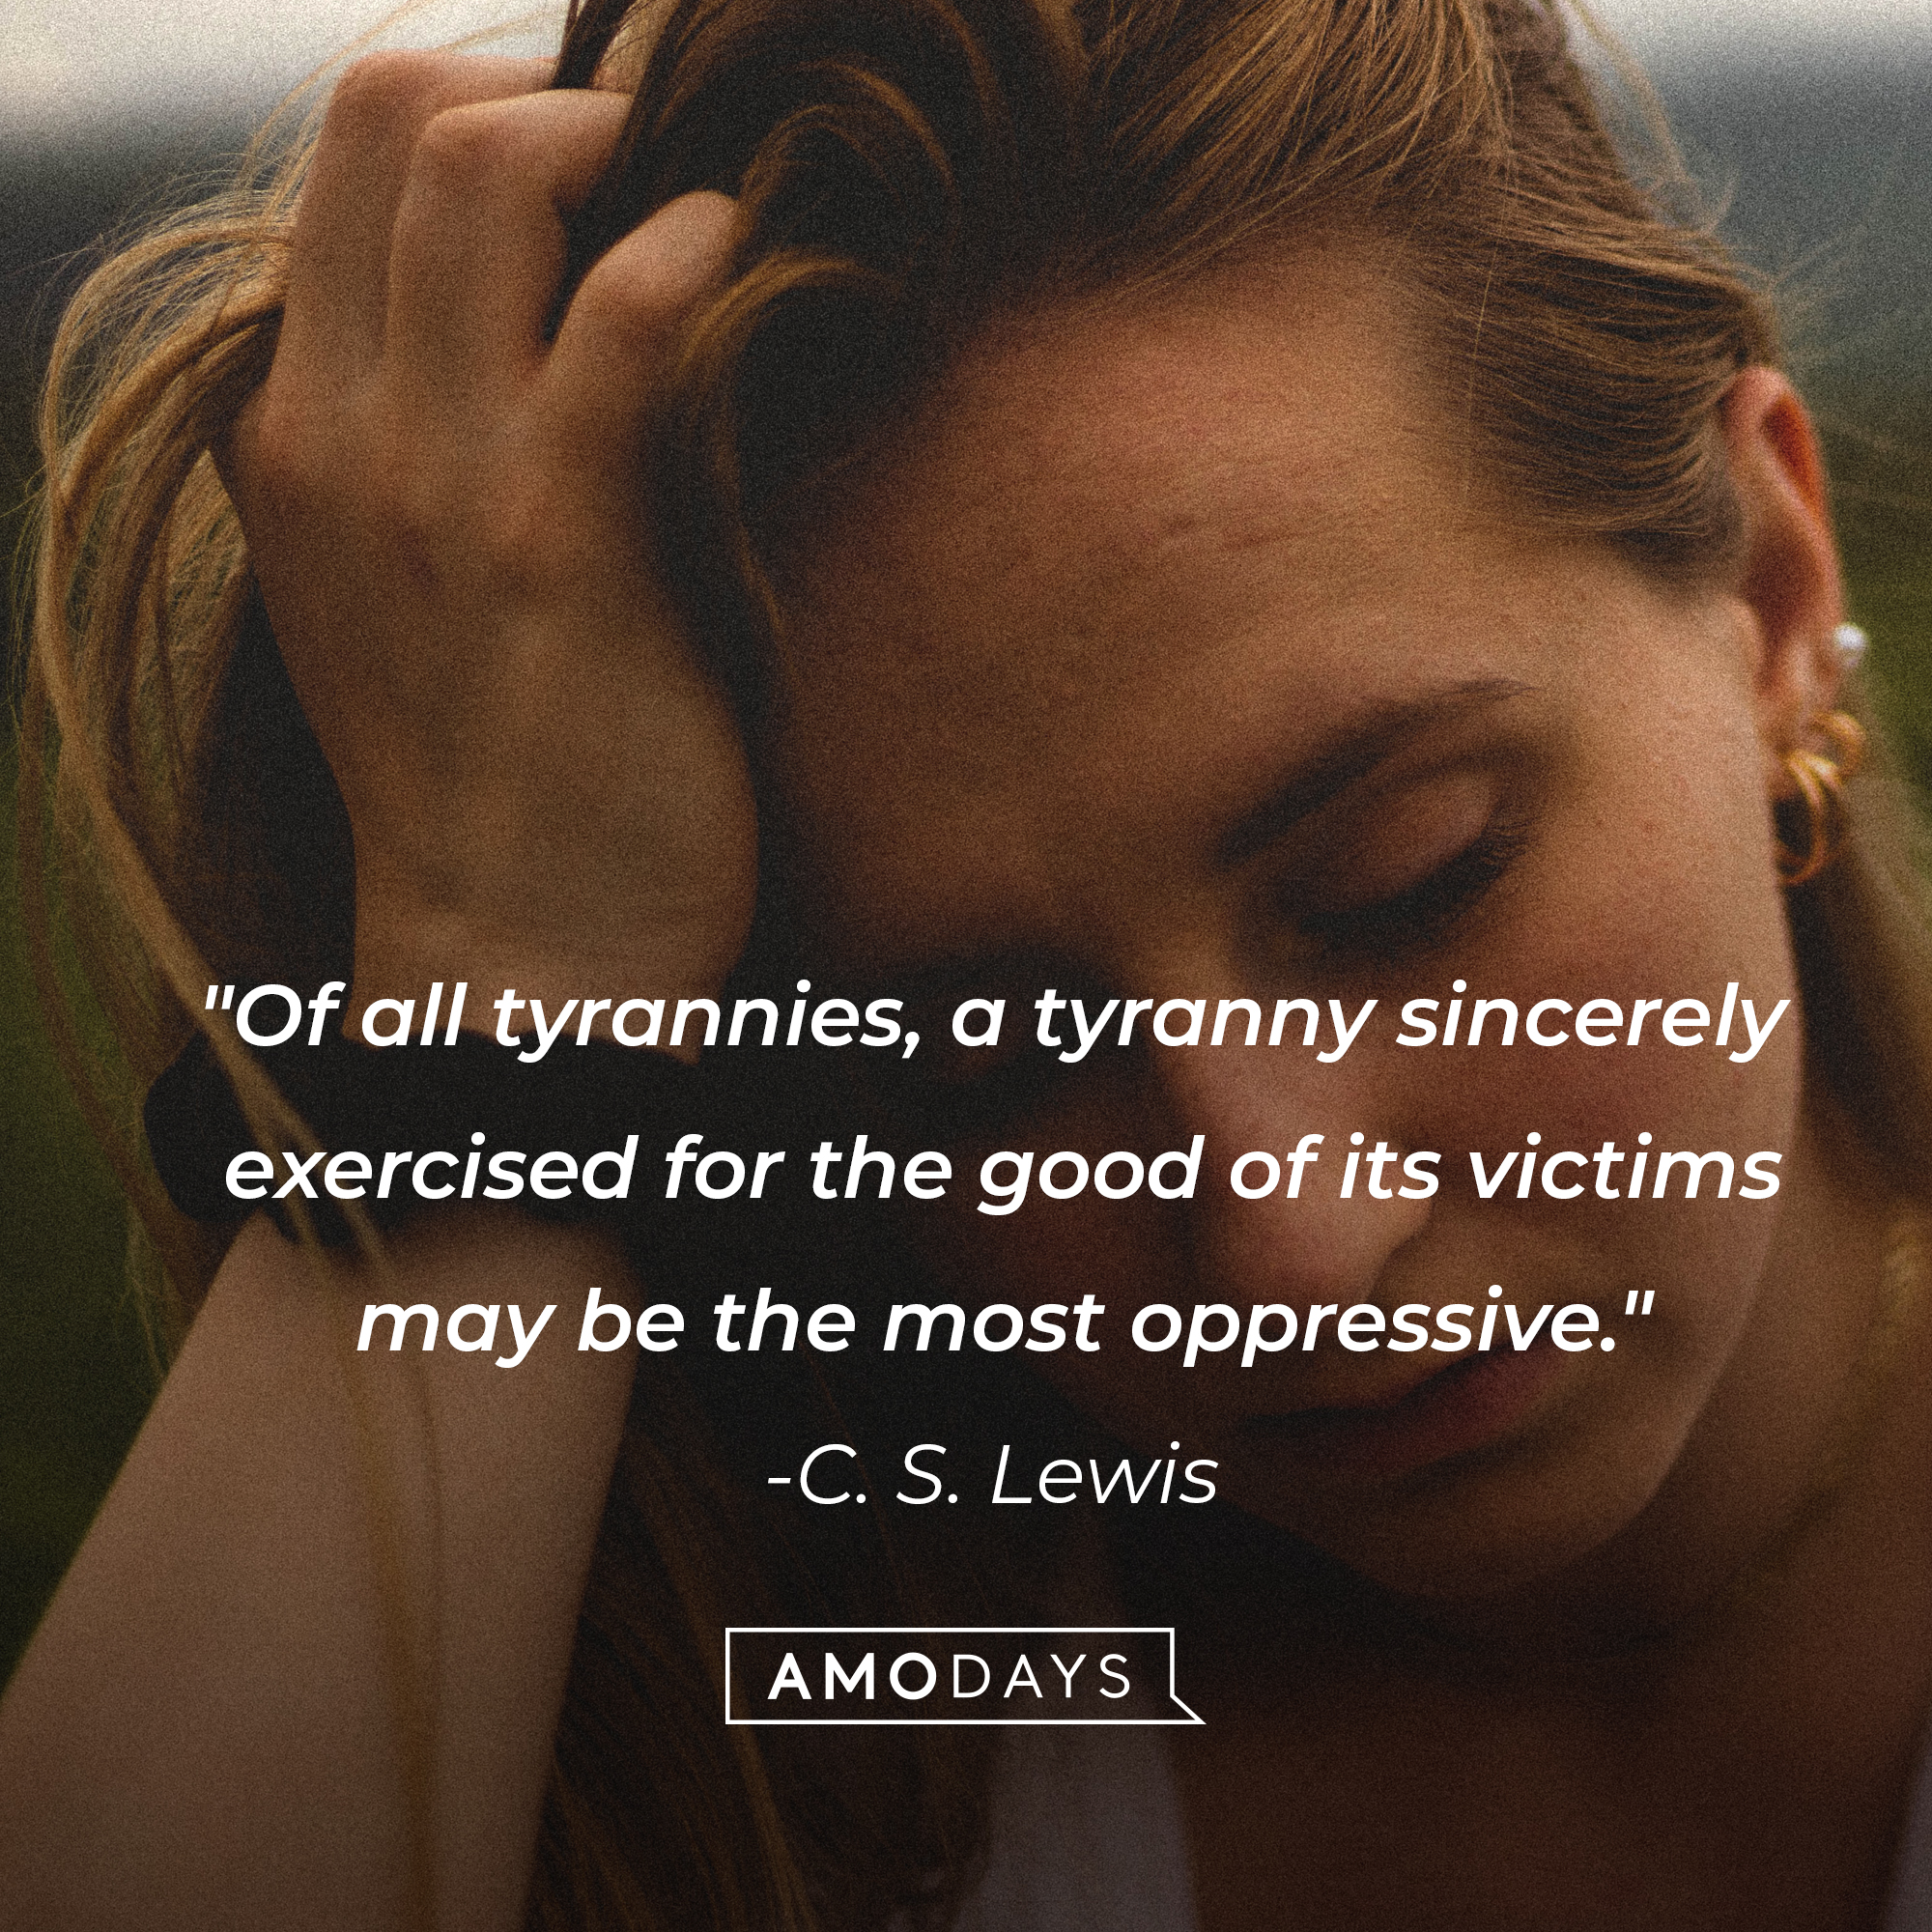 C. S. Lewis' quote: "Of all tyrannies, a tyranny sincerely exercised for the good of its victims may be the most oppressive." | Image: AmoDays